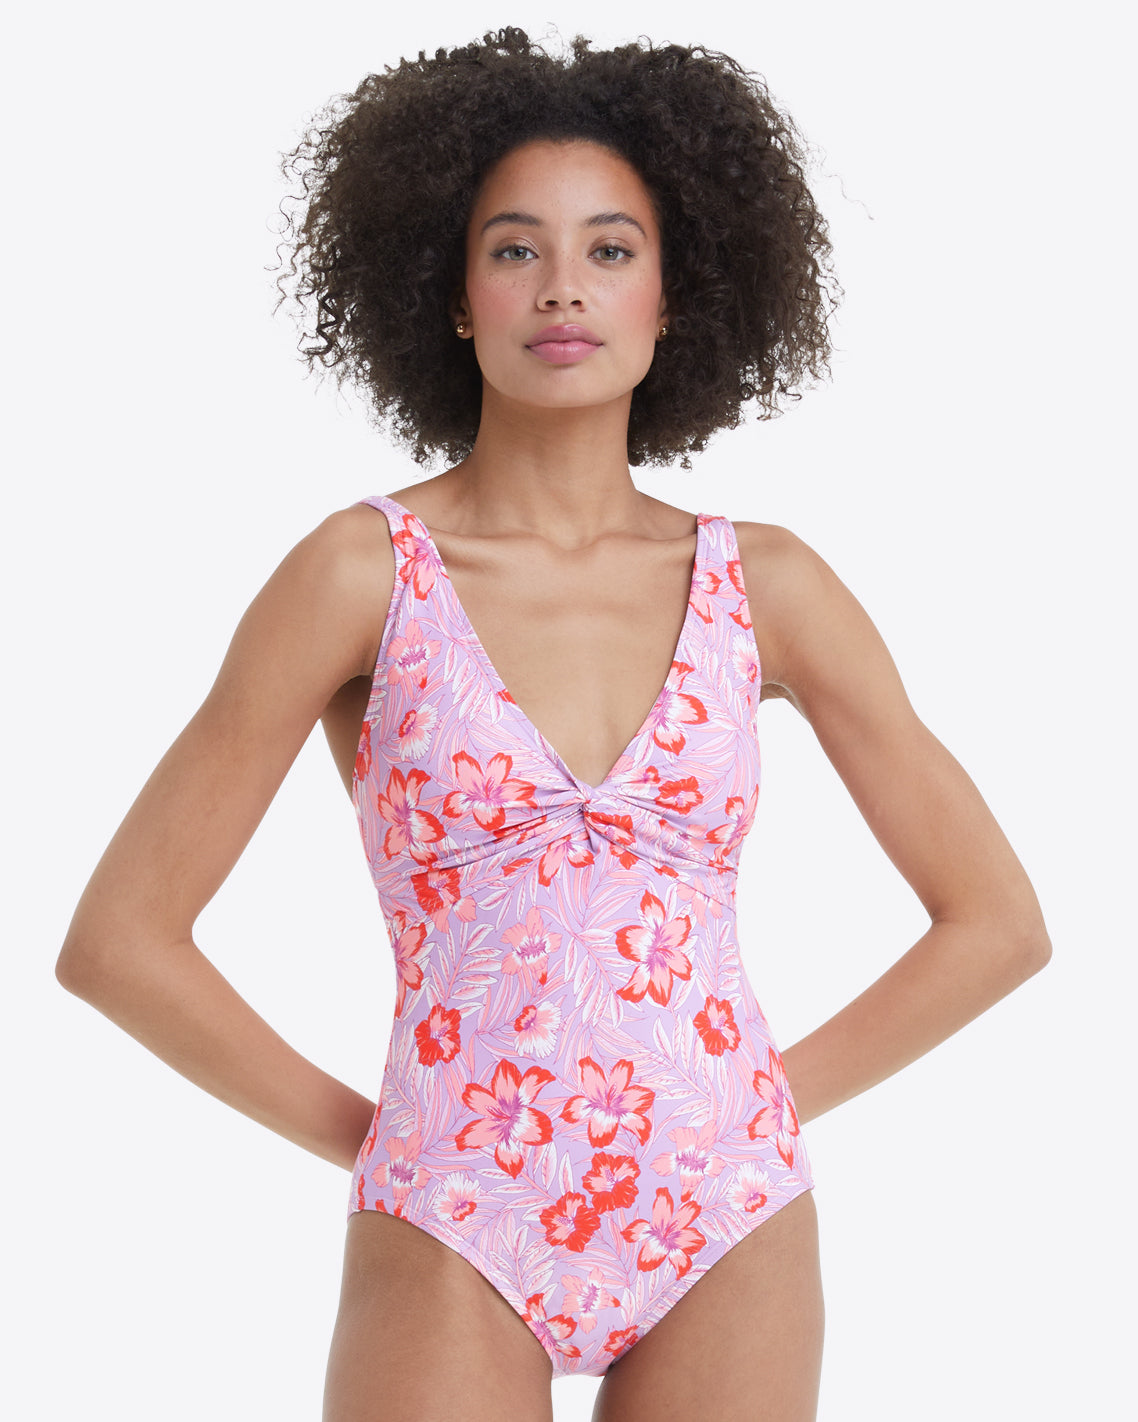 FLASH SALE! Kohls Swimsuits Start At $12, And You Can Take 20 Percent Off  Today